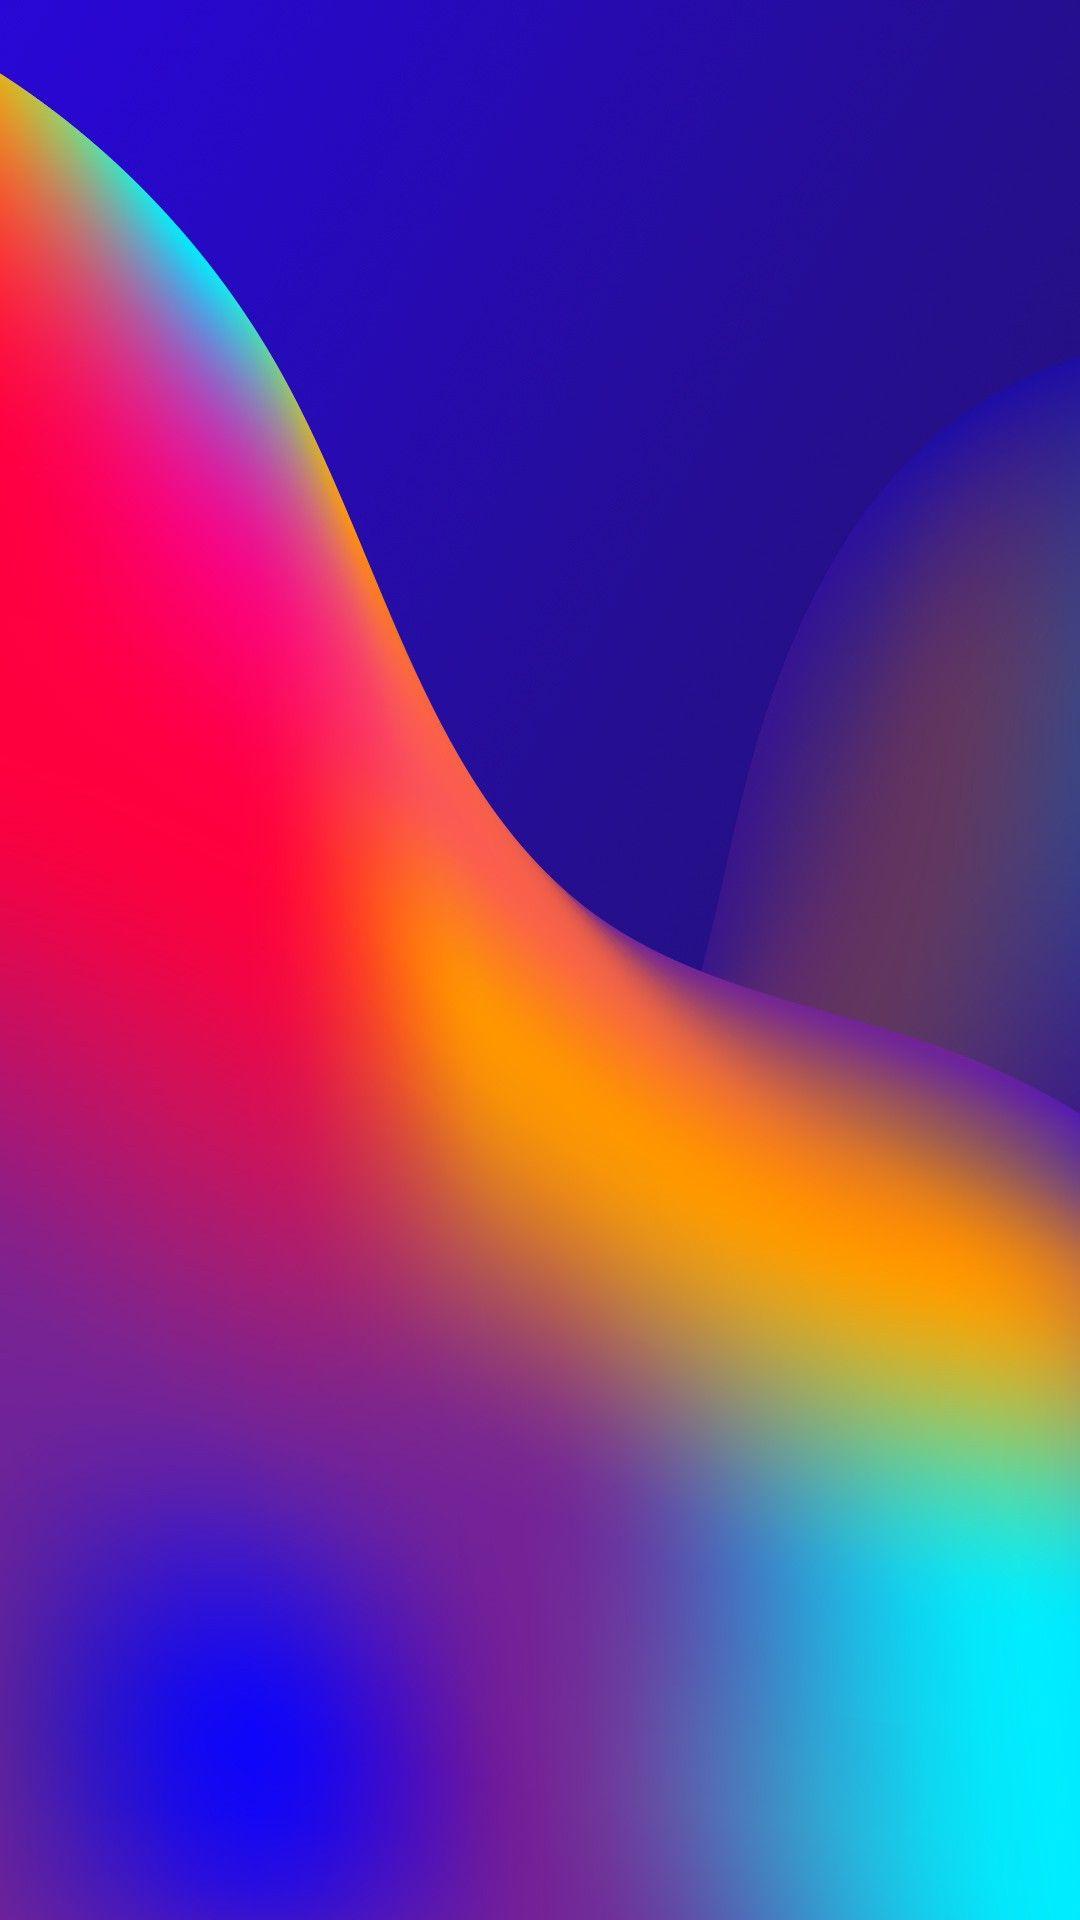 Abstract #Neon Gradient #wallpaper HD 4k background for android